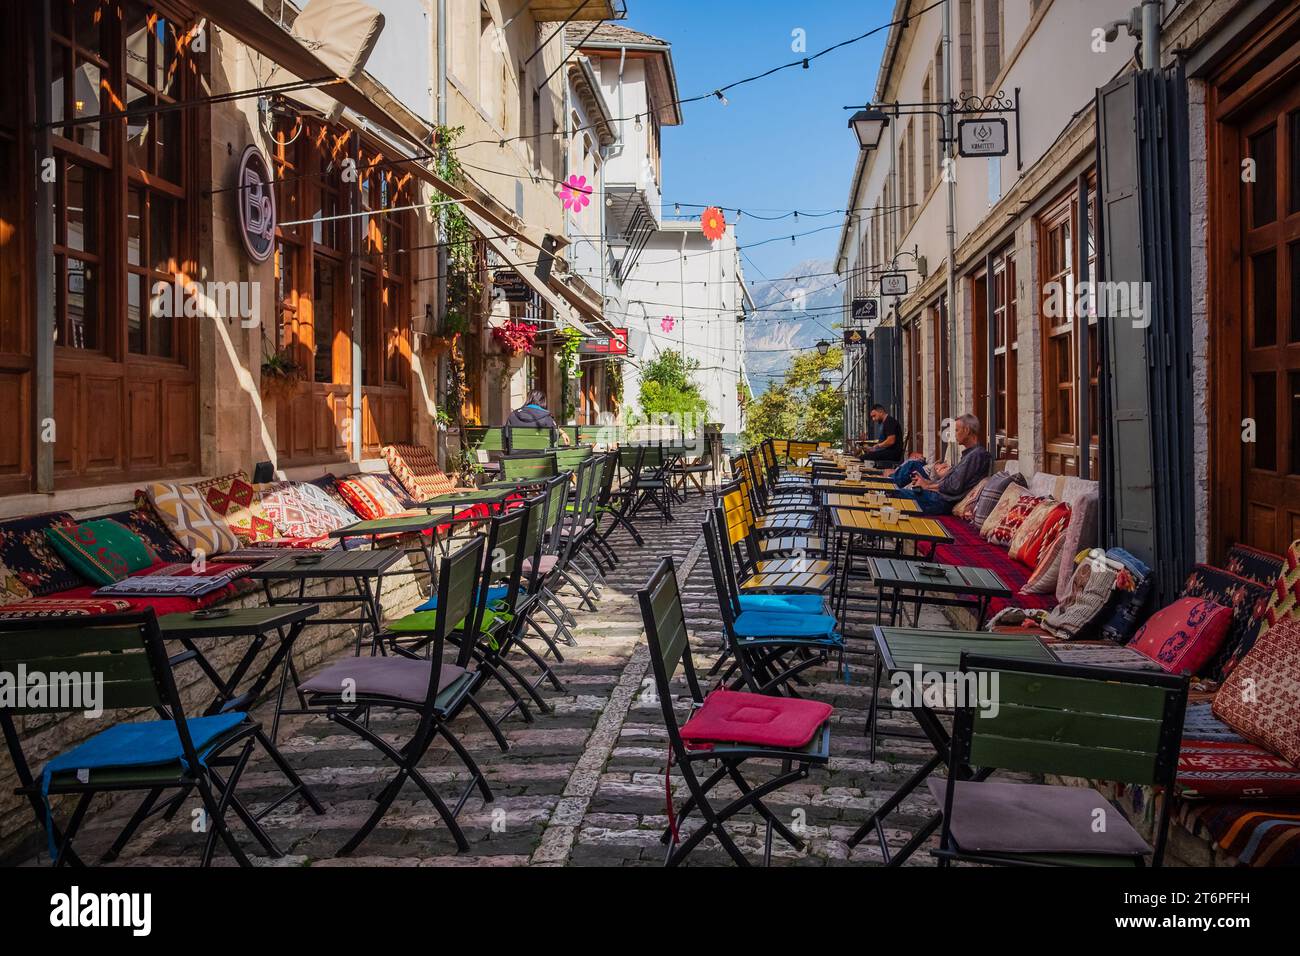 Outdoor empty coffee and restaurant terrace with colorful tables and chairs. Old fashioned cafe terrace in Berat Albania. Restaurant patio furniture. Stock Photo